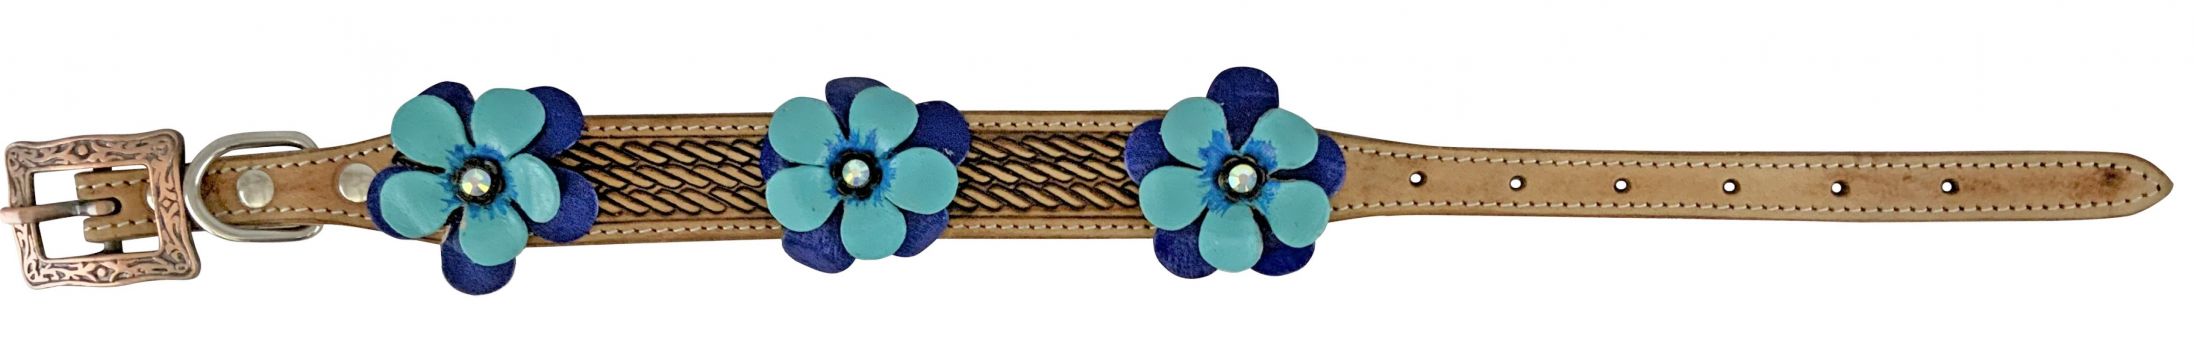 Showman Couture Genuine leather dog collar with blue 3D flower accent